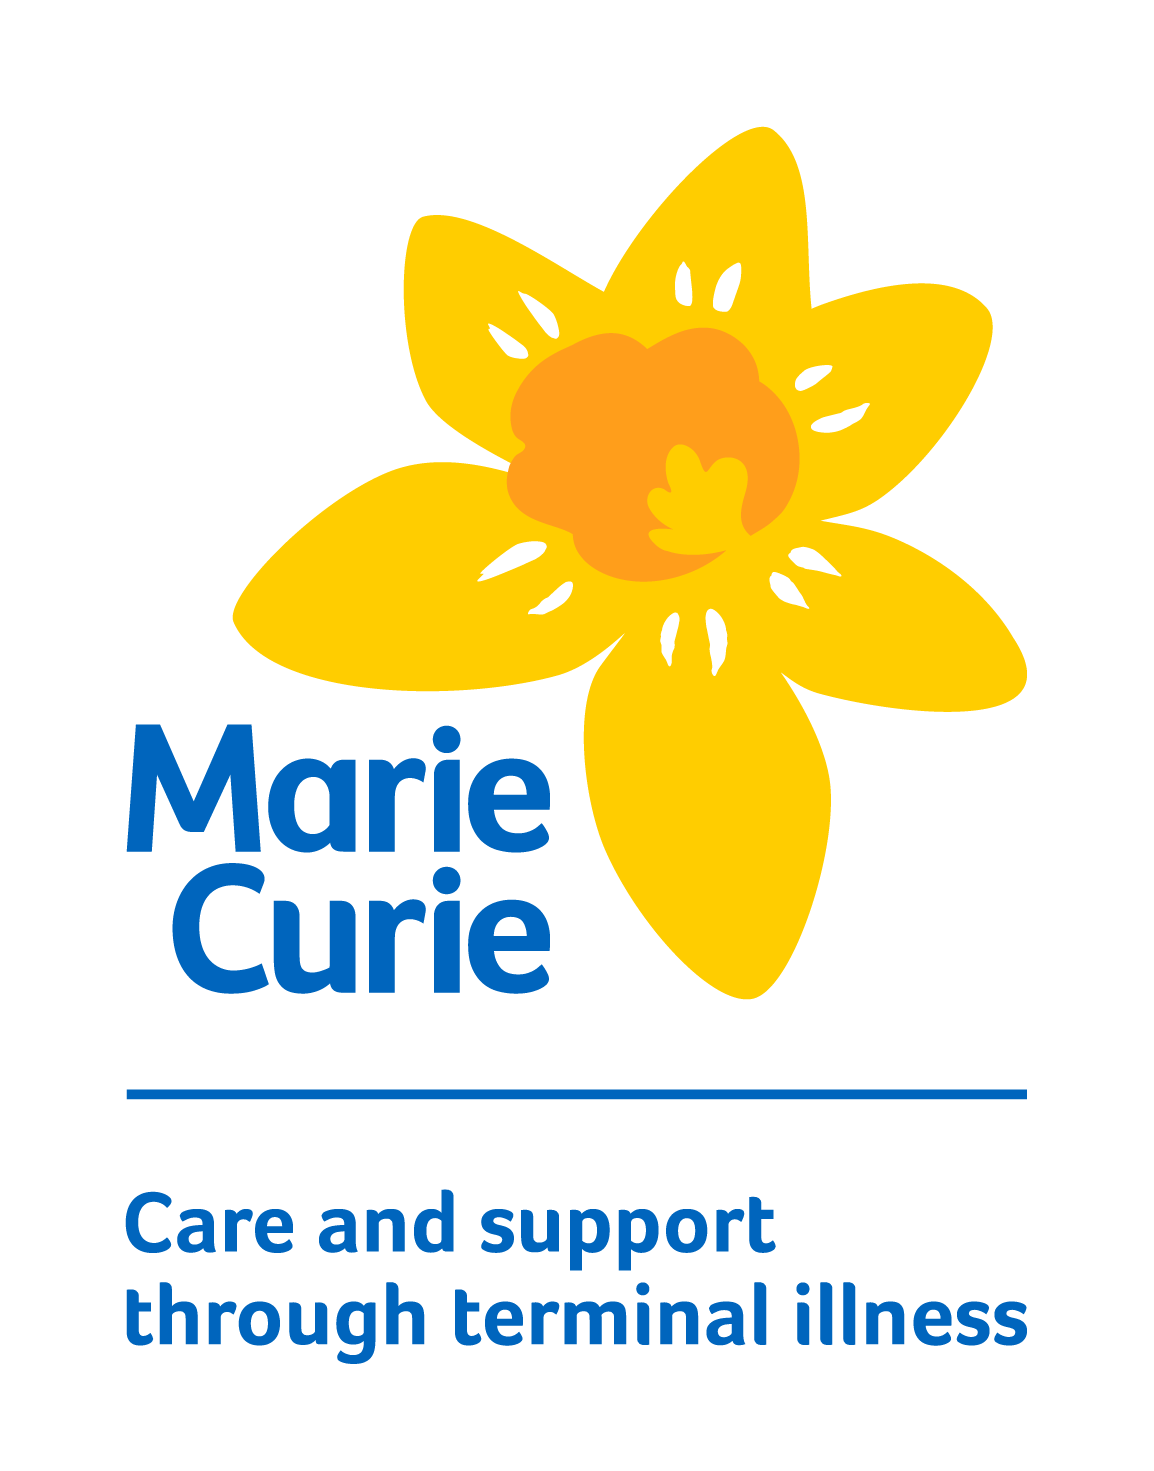 Concert for Marie Curie